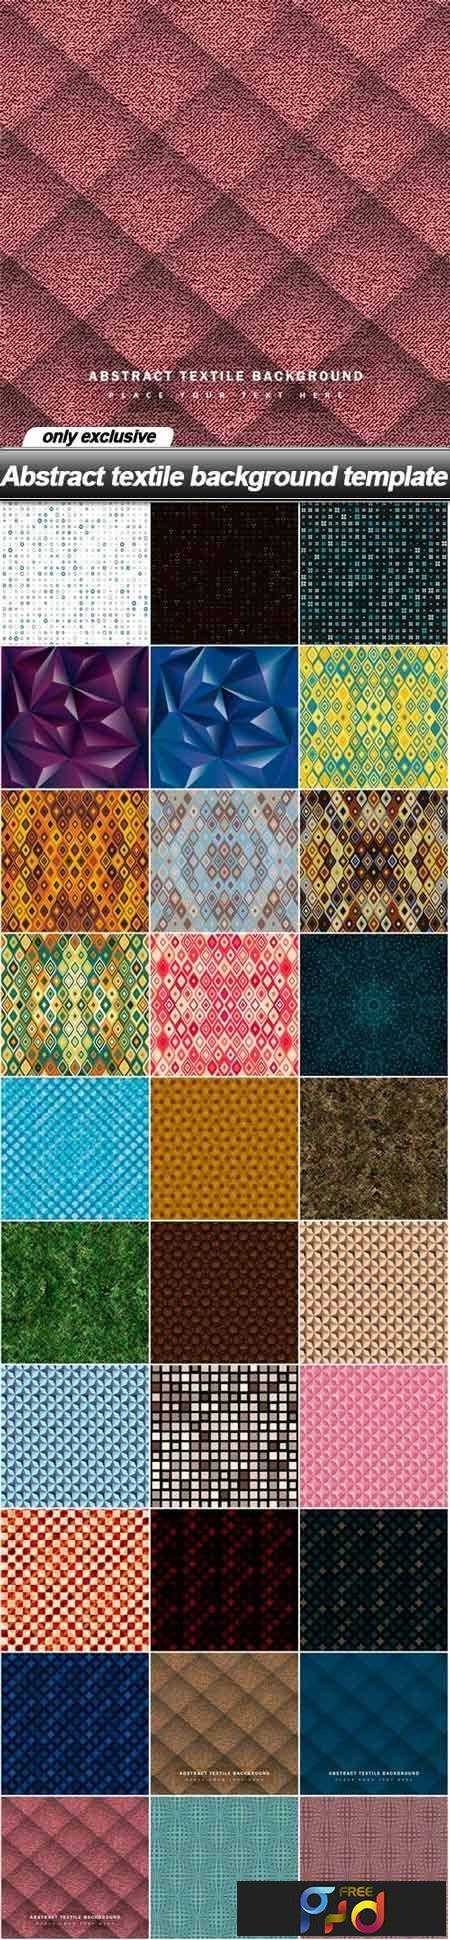 FreePsdVn.com_VECTOR_1701207_abstract_textile_background_template_30_eps